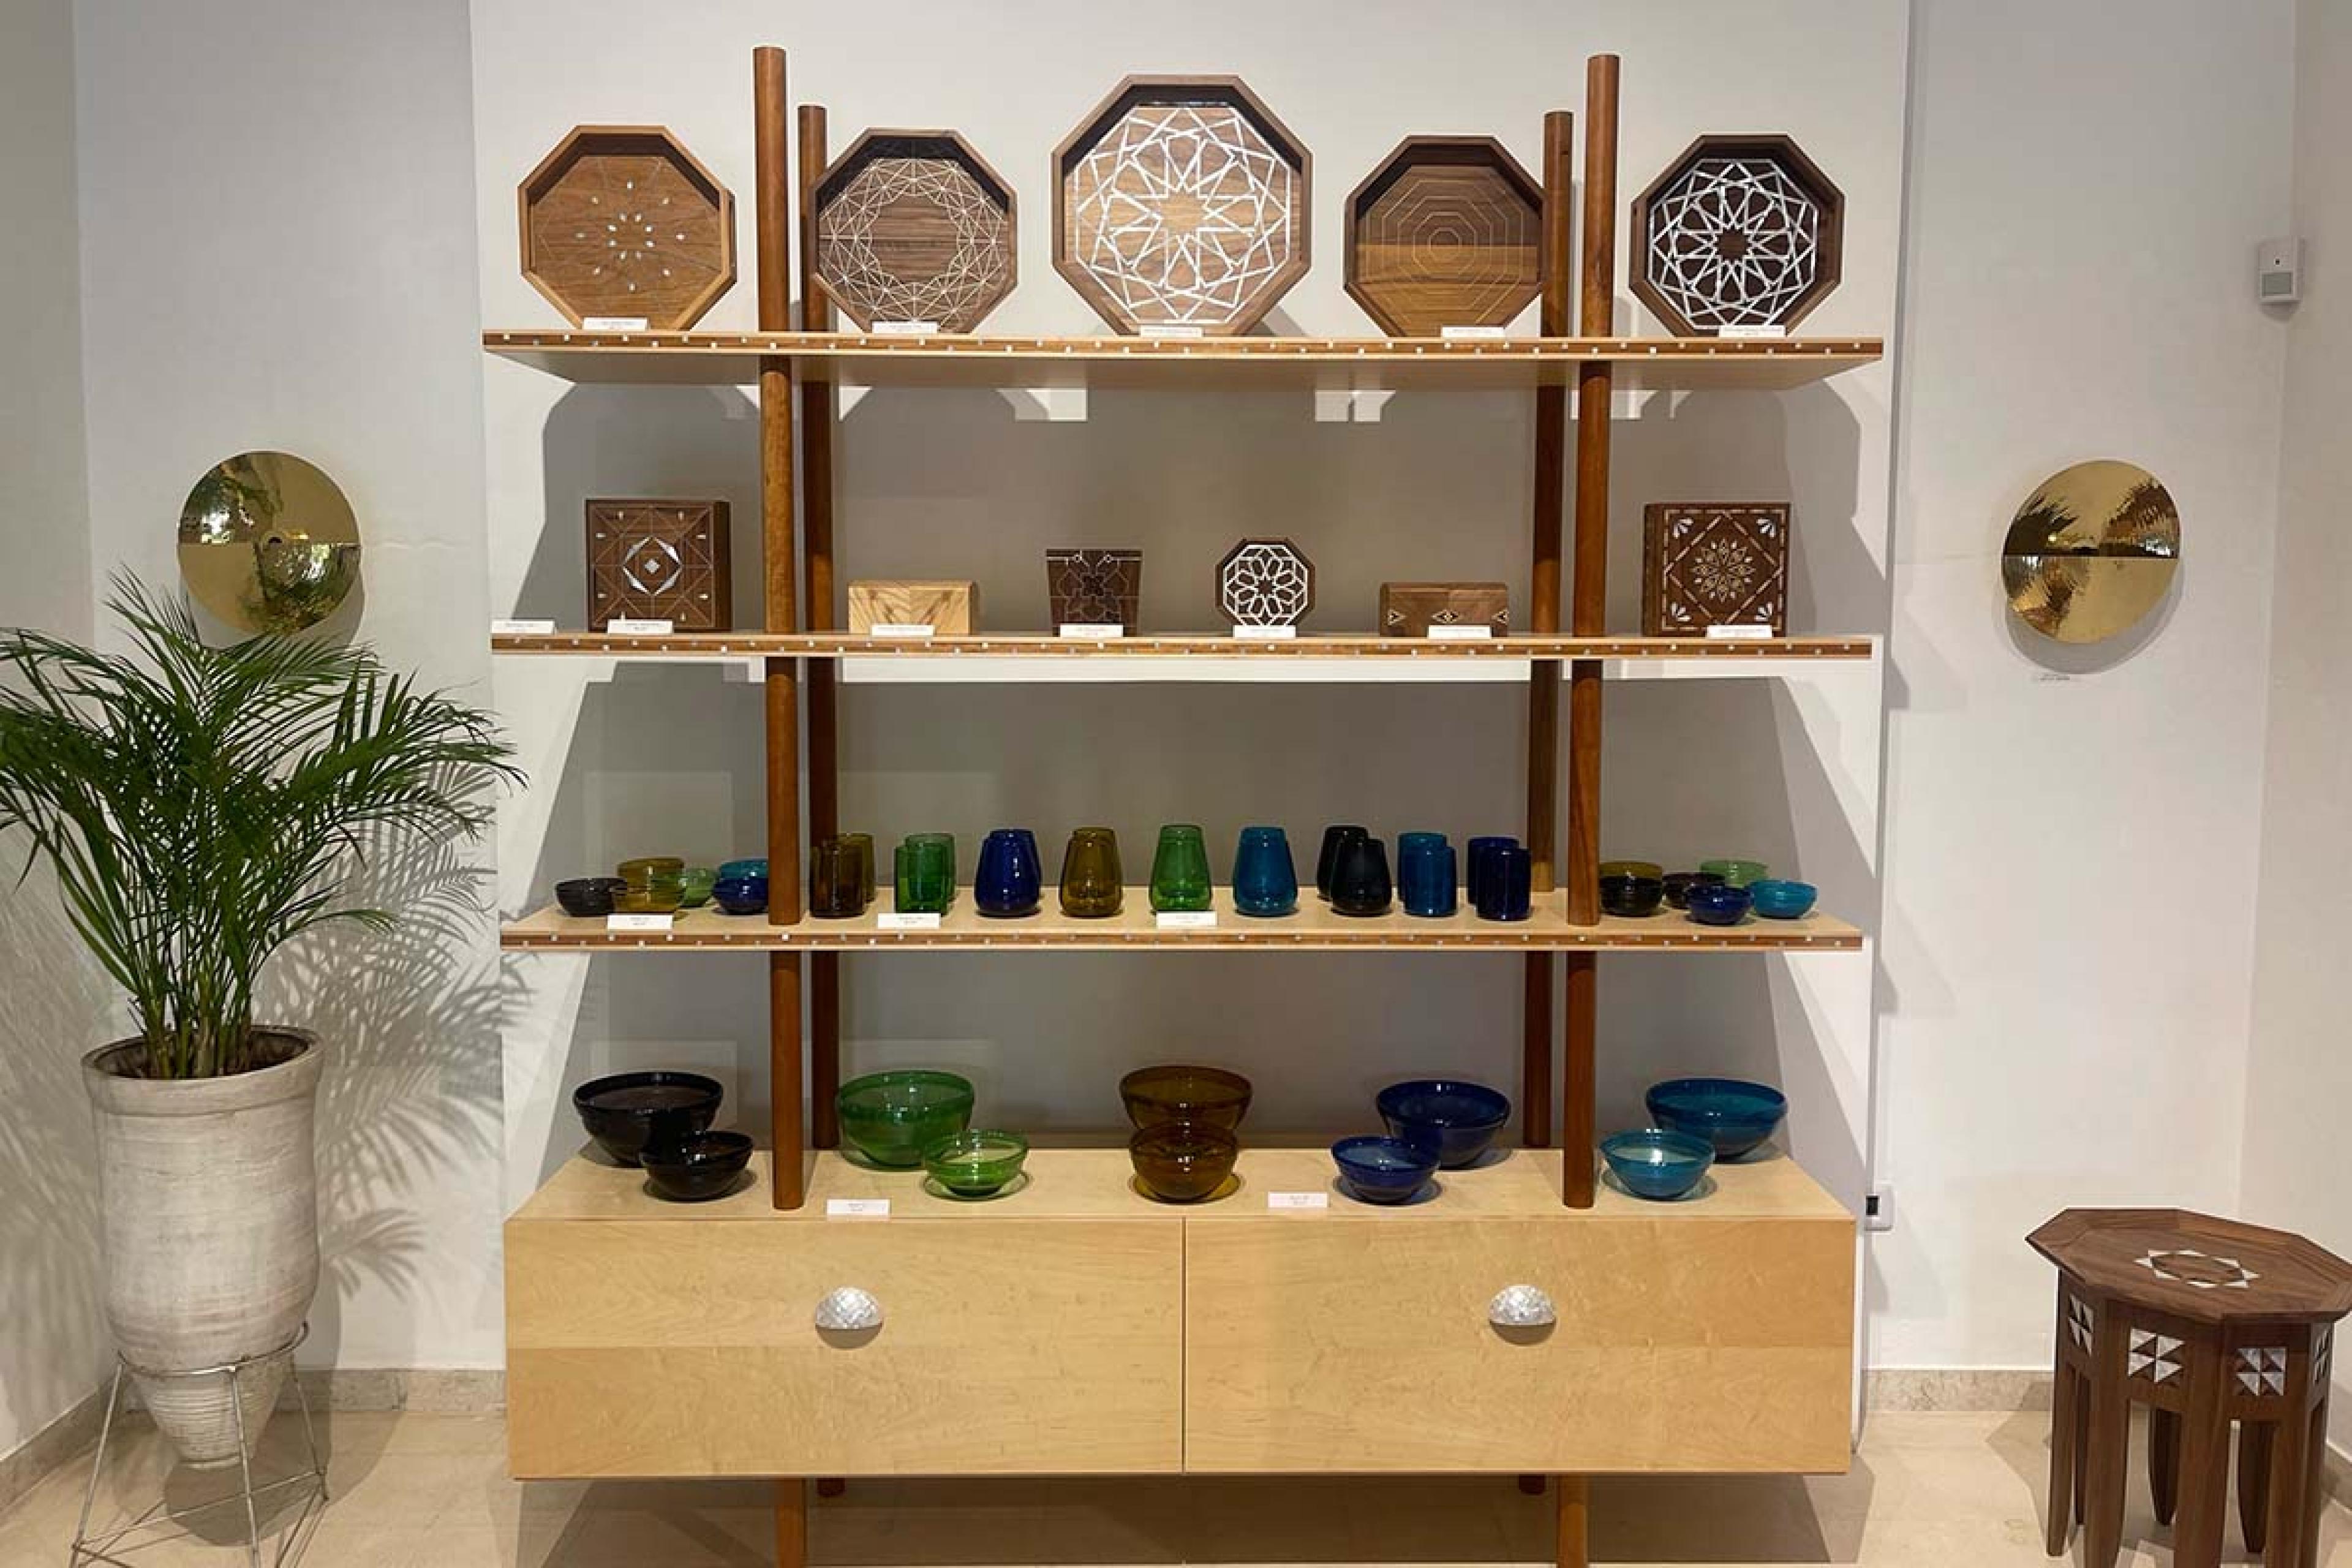 wooden display with colored glassware and wooden geometric dishes